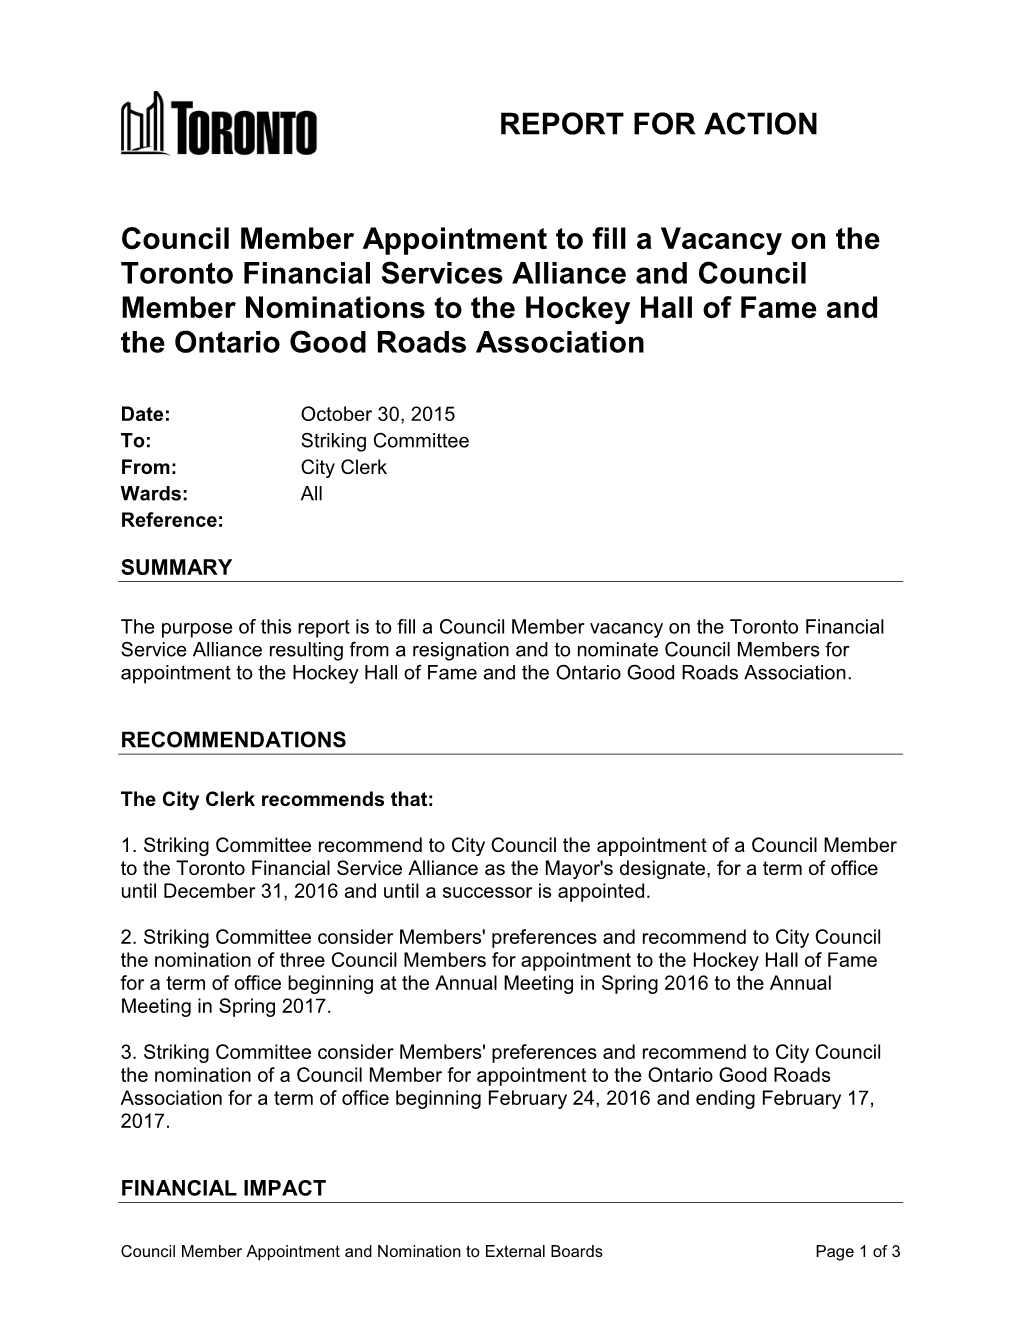 Council Member Appointment to Fill a Vacancy On